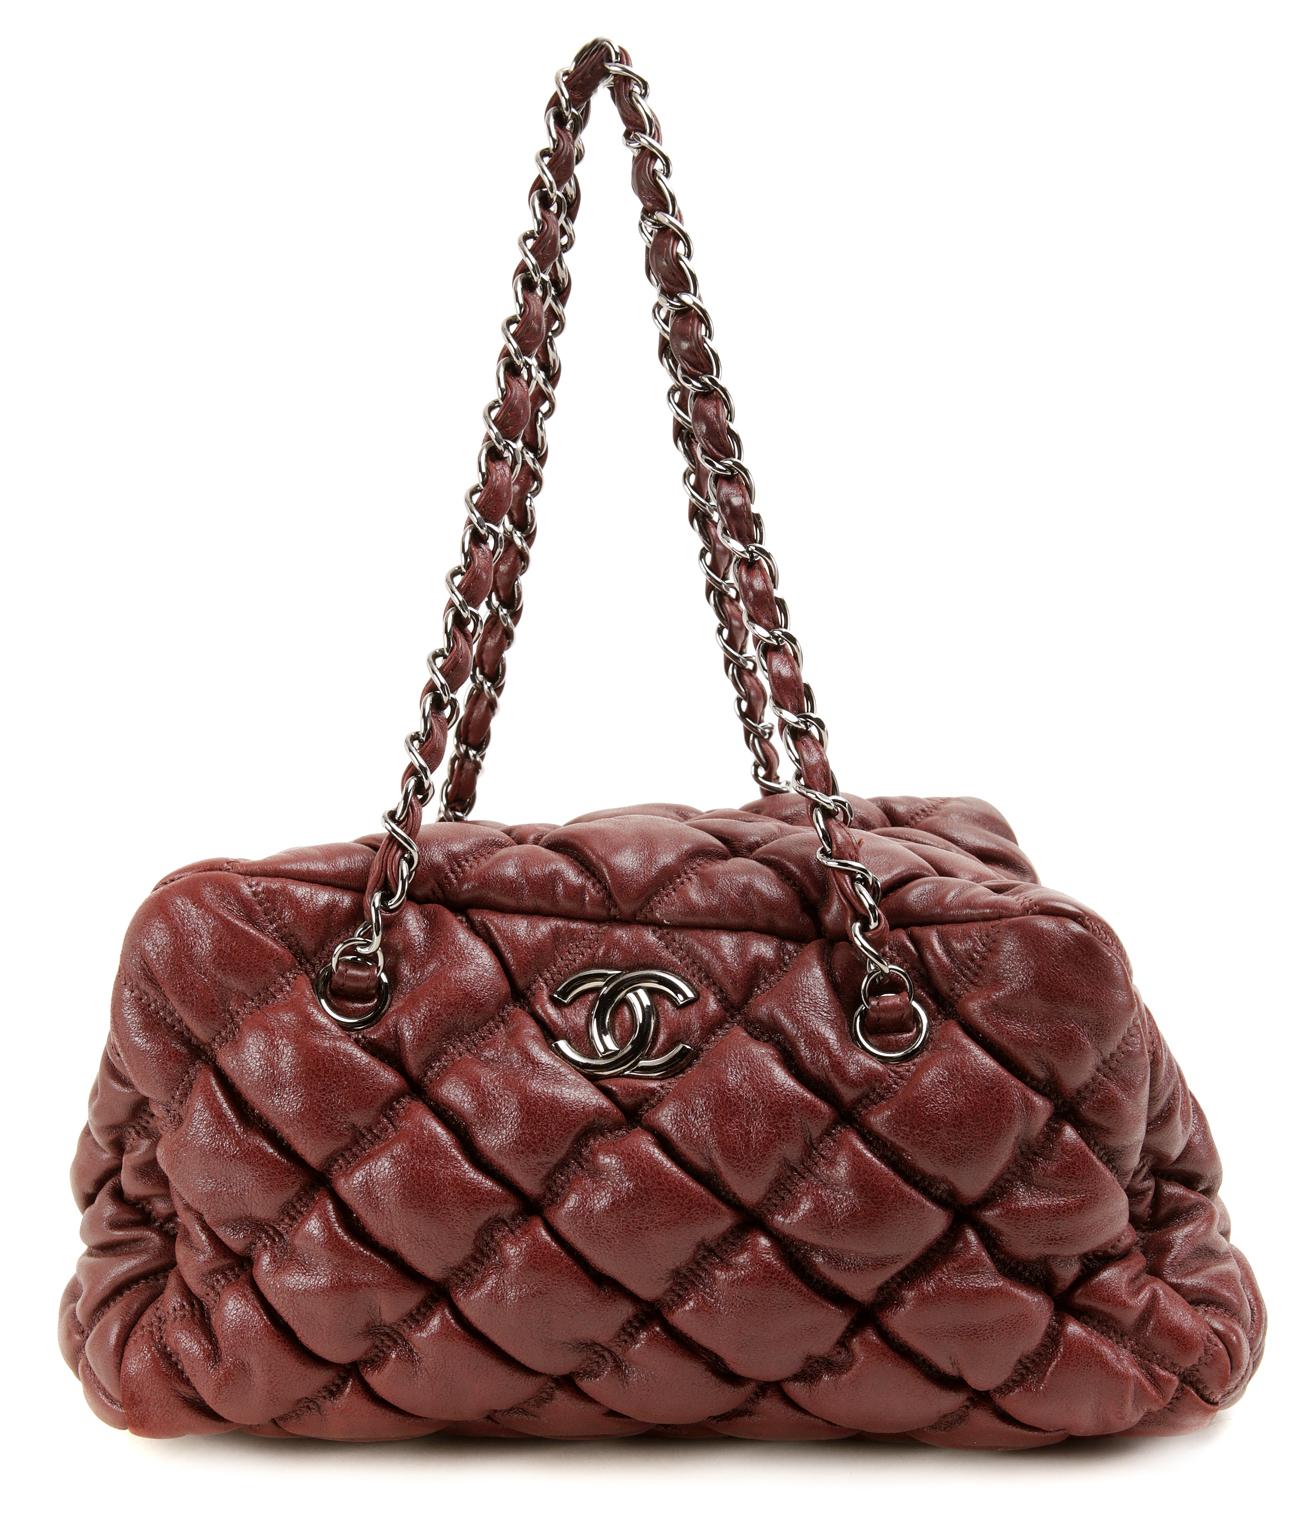 Brown Chanel Dark Red Leather Bubble Quilt Bag